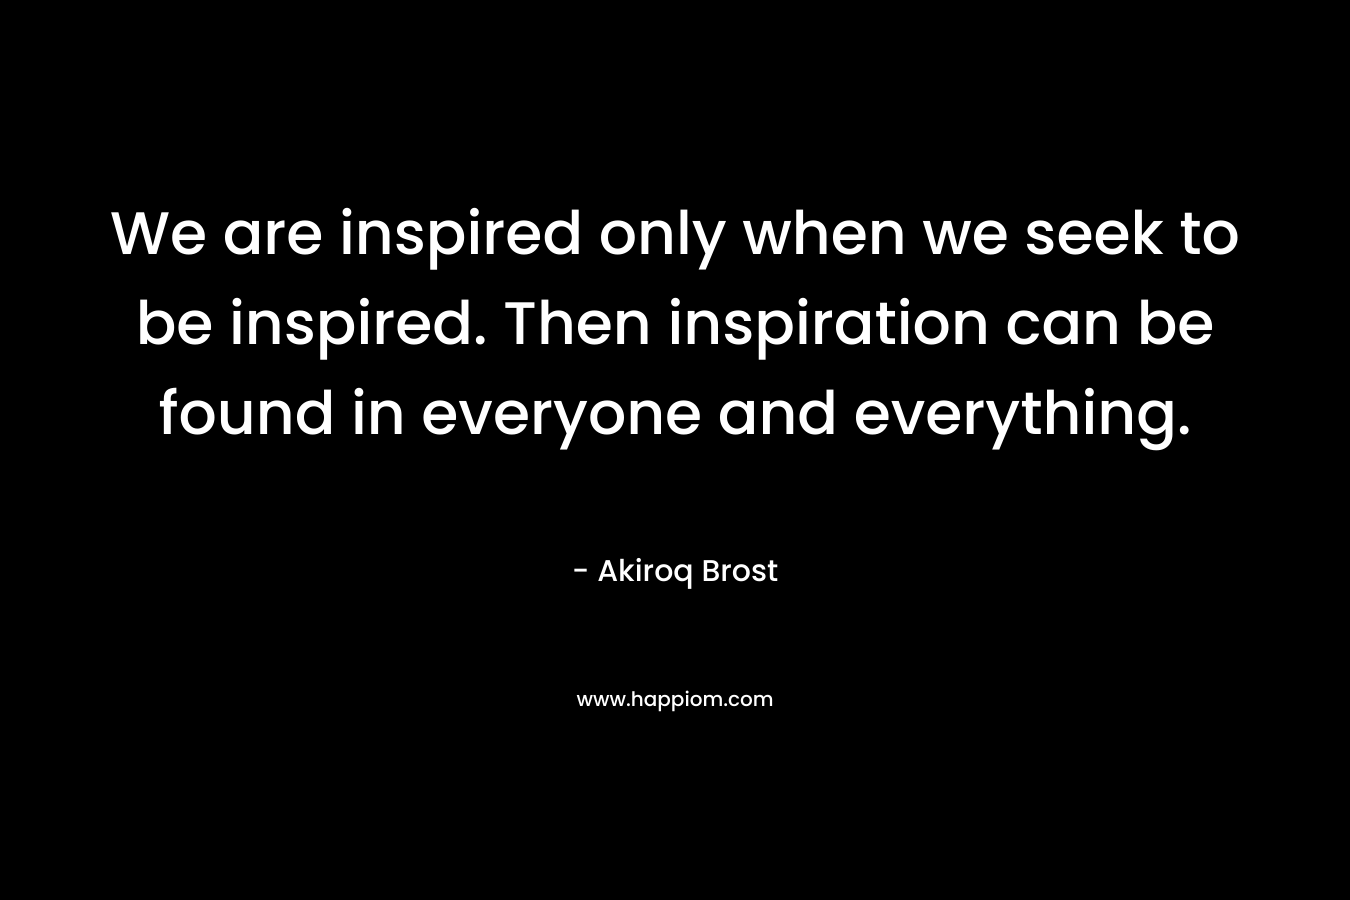 We are inspired only when we seek to be inspired. Then inspiration can be found in everyone and everything.